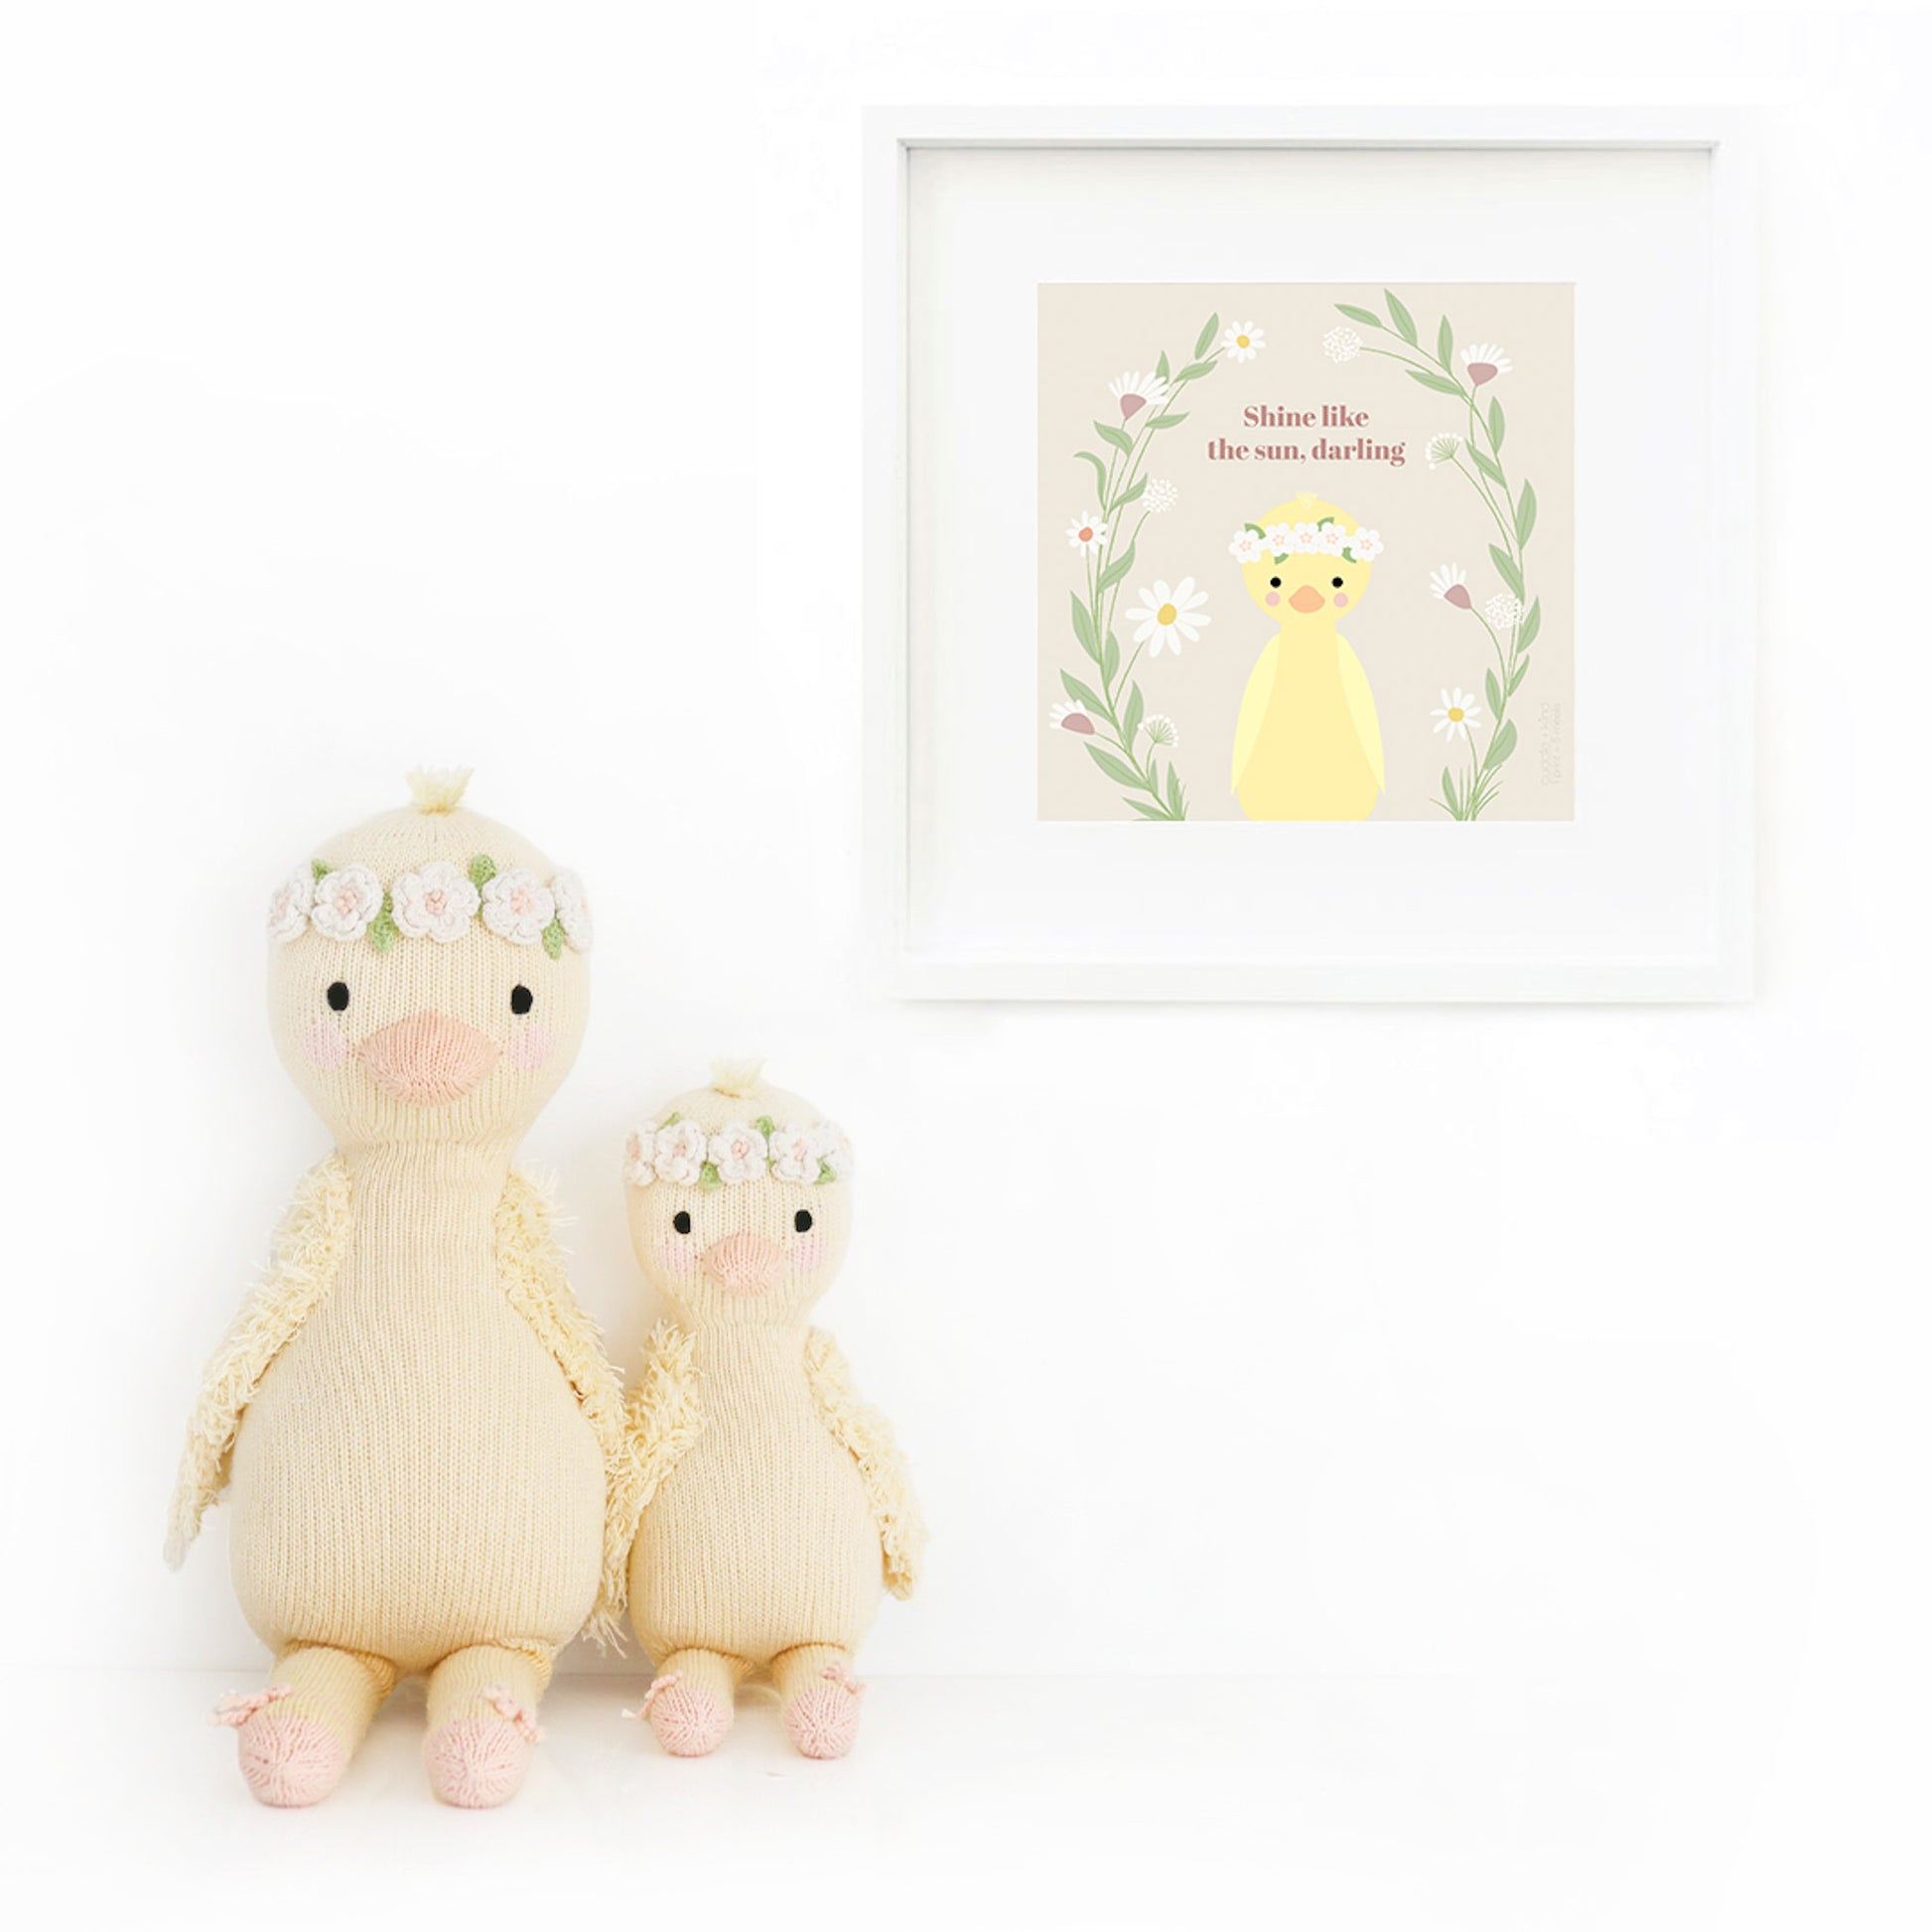 Two Flora the duckling stuffed dolls sitting beside a framed print with a drawing of Flora, with text that says “Shine like the sun, darling.”